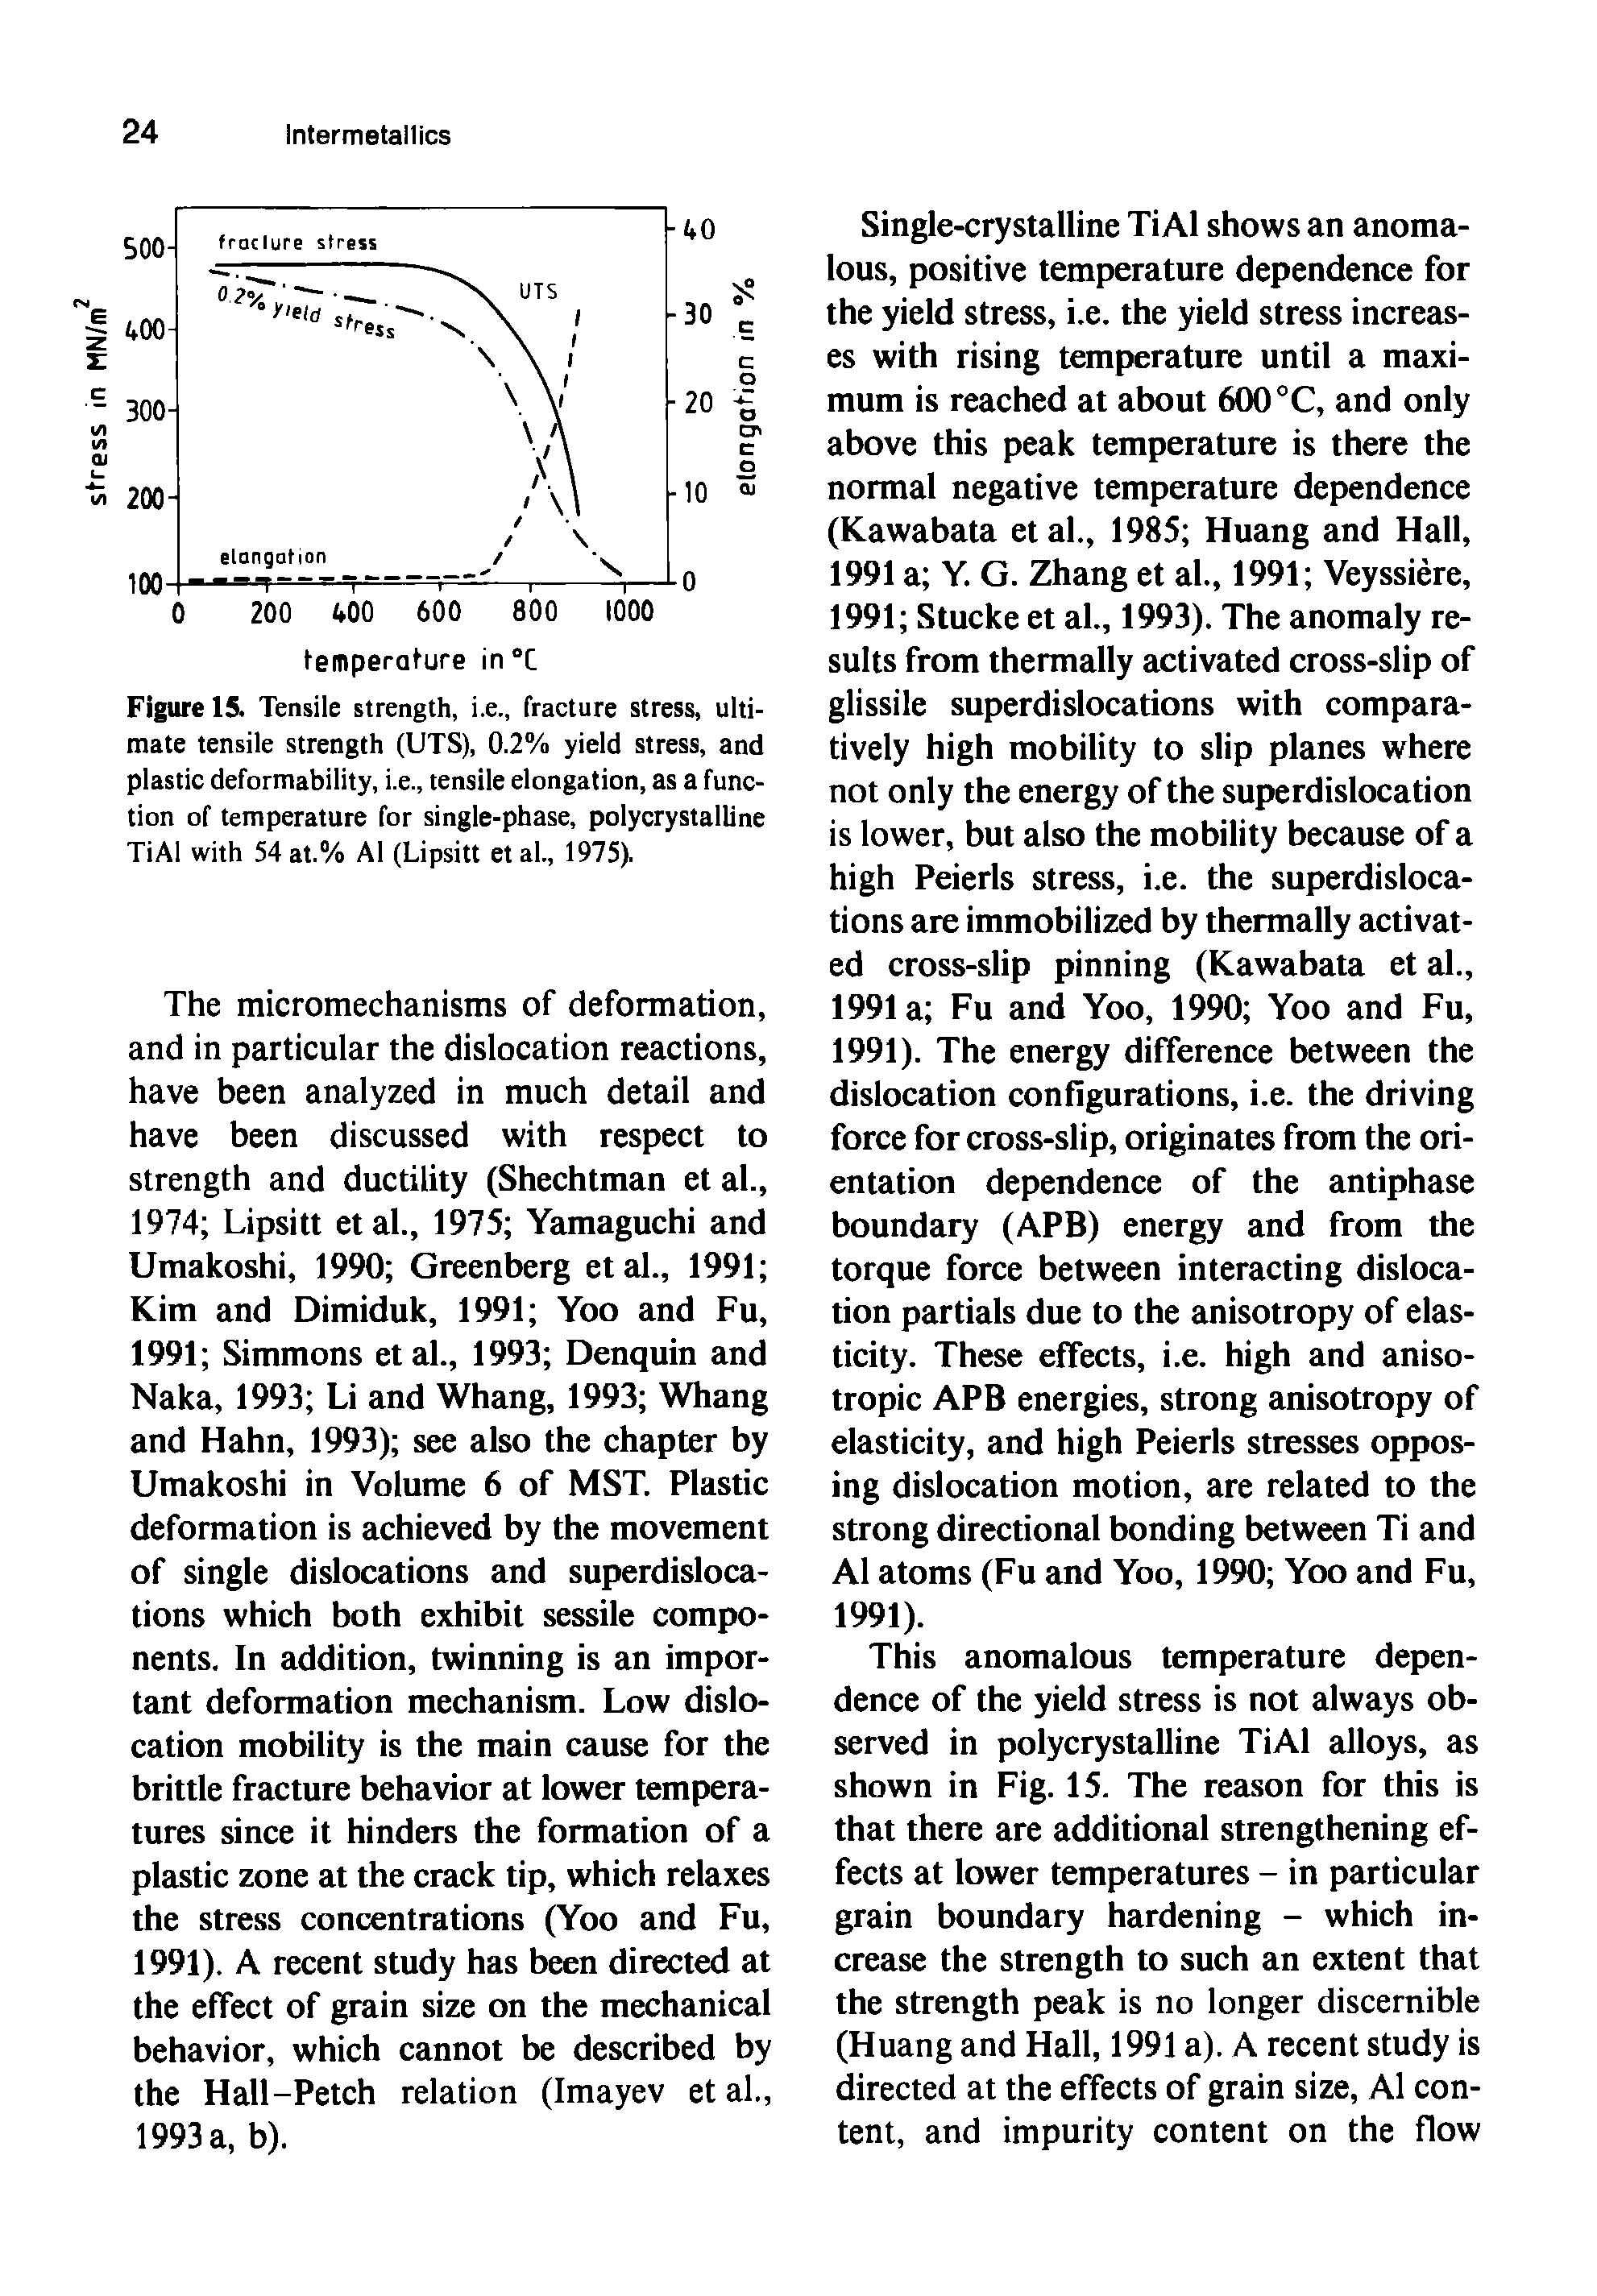 Figure 15. Tensile strength, i.e., fracture stress, ultimate tensile strength (UTS), 0.2% yield stress, and plastic deformability, i.e., tensile elongation, as a function of temperature for single-phase, polycrystalline TiAl with 54 at.% Al (Lipsitt et al., 1975).